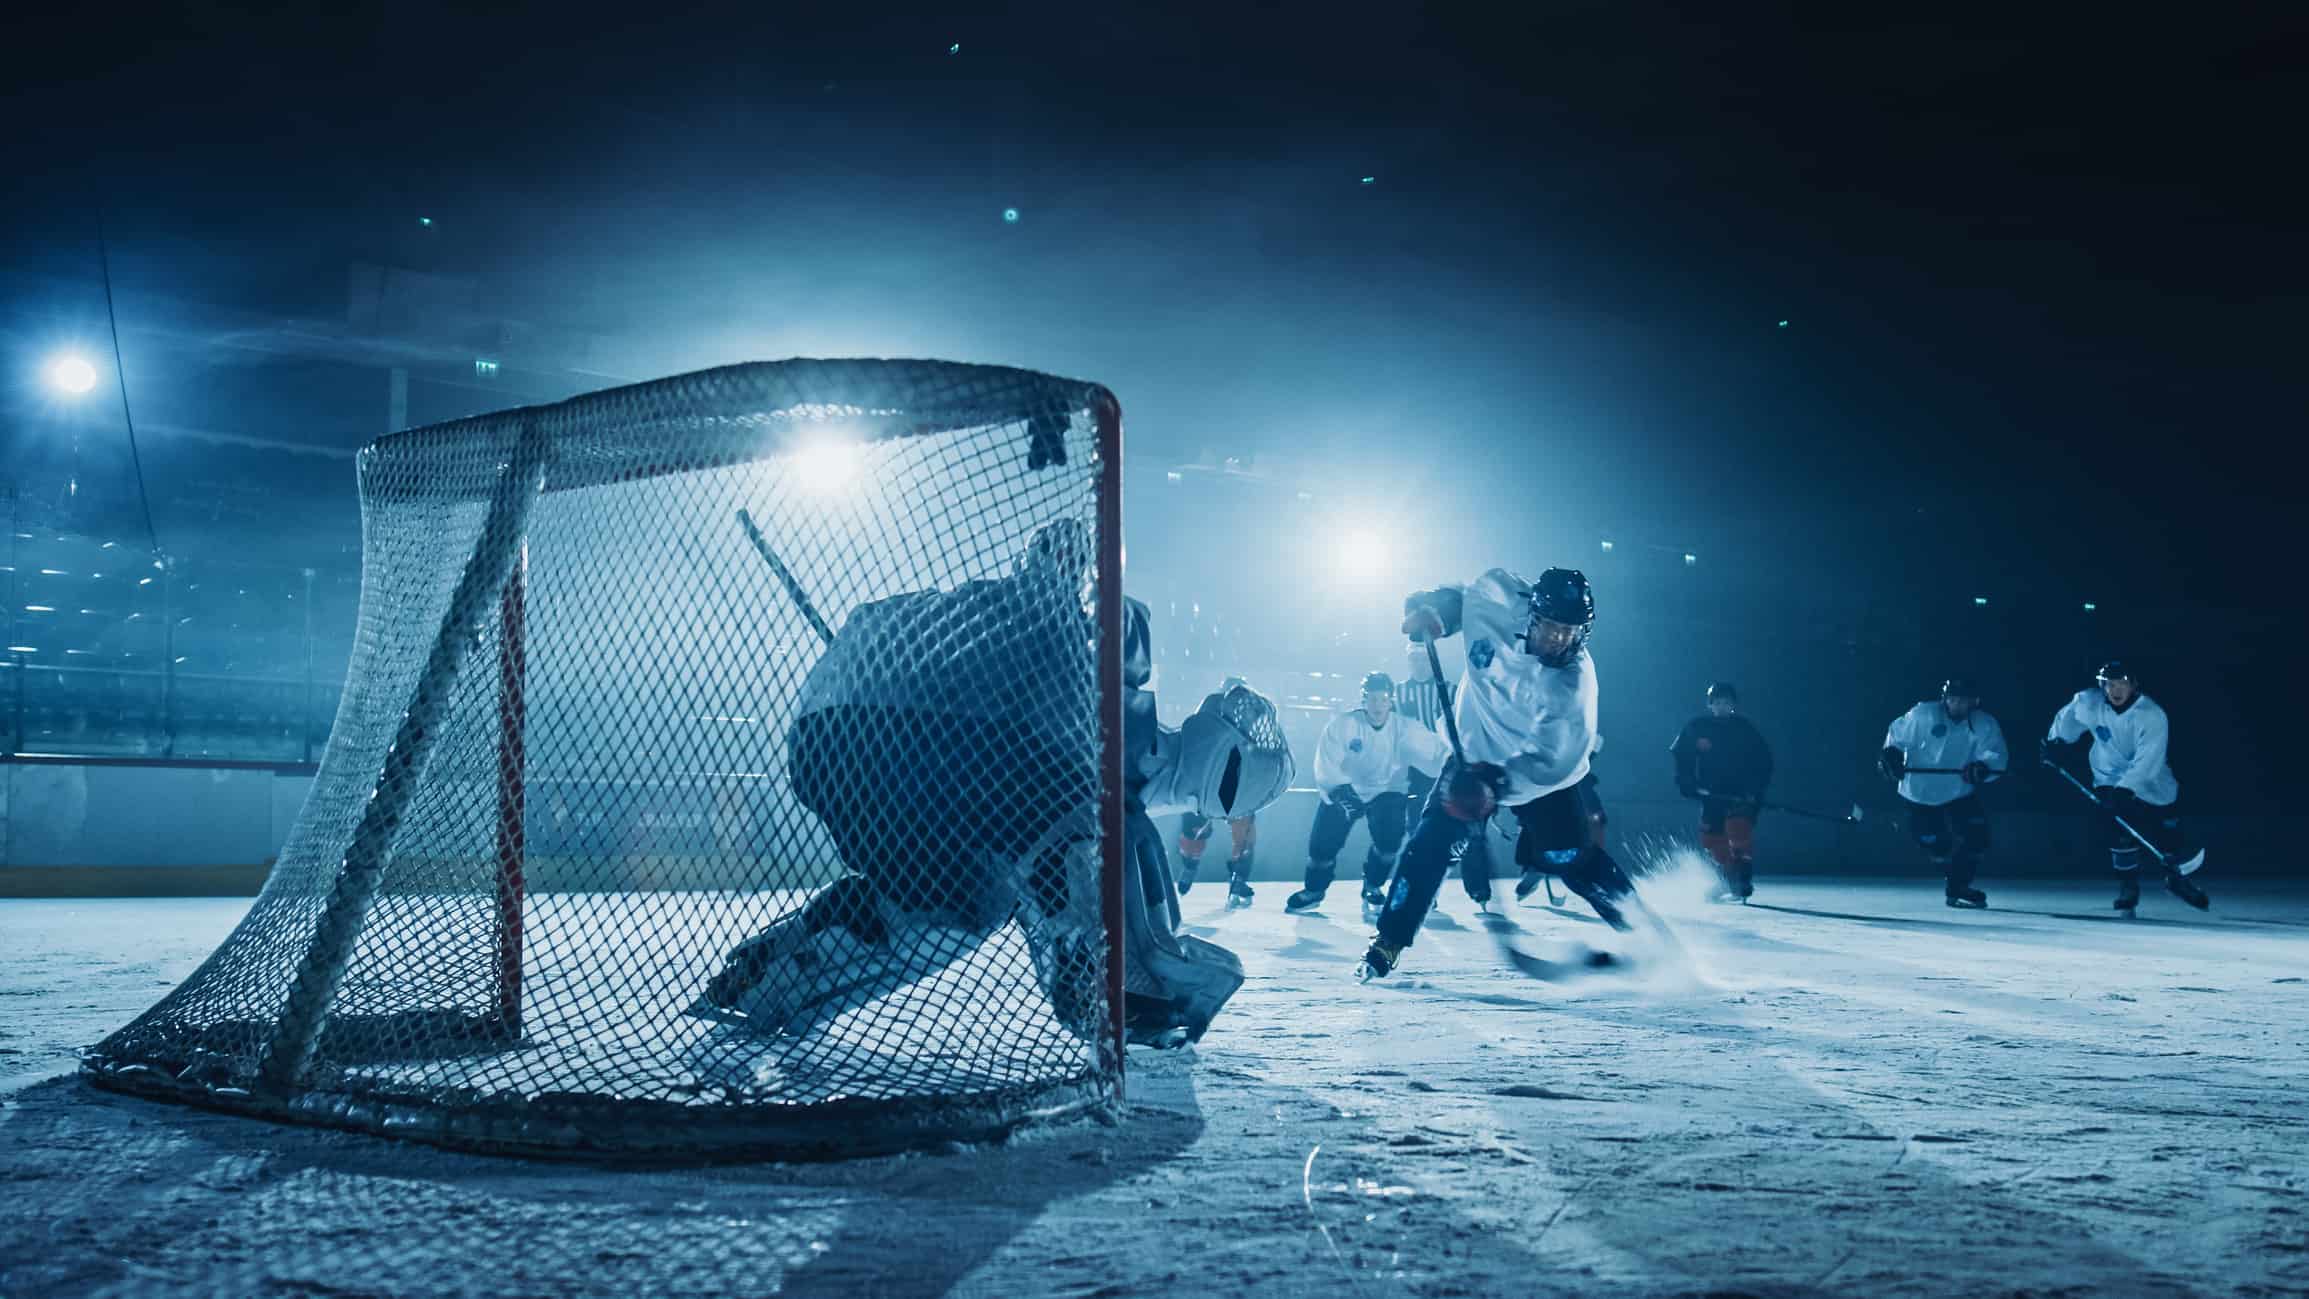 Ice Hockey Rink Arena: Goalie against Forward Player who Does Slapshot, Shots Puck with Stick and Scores Goal. Forwarder against Goaltender.